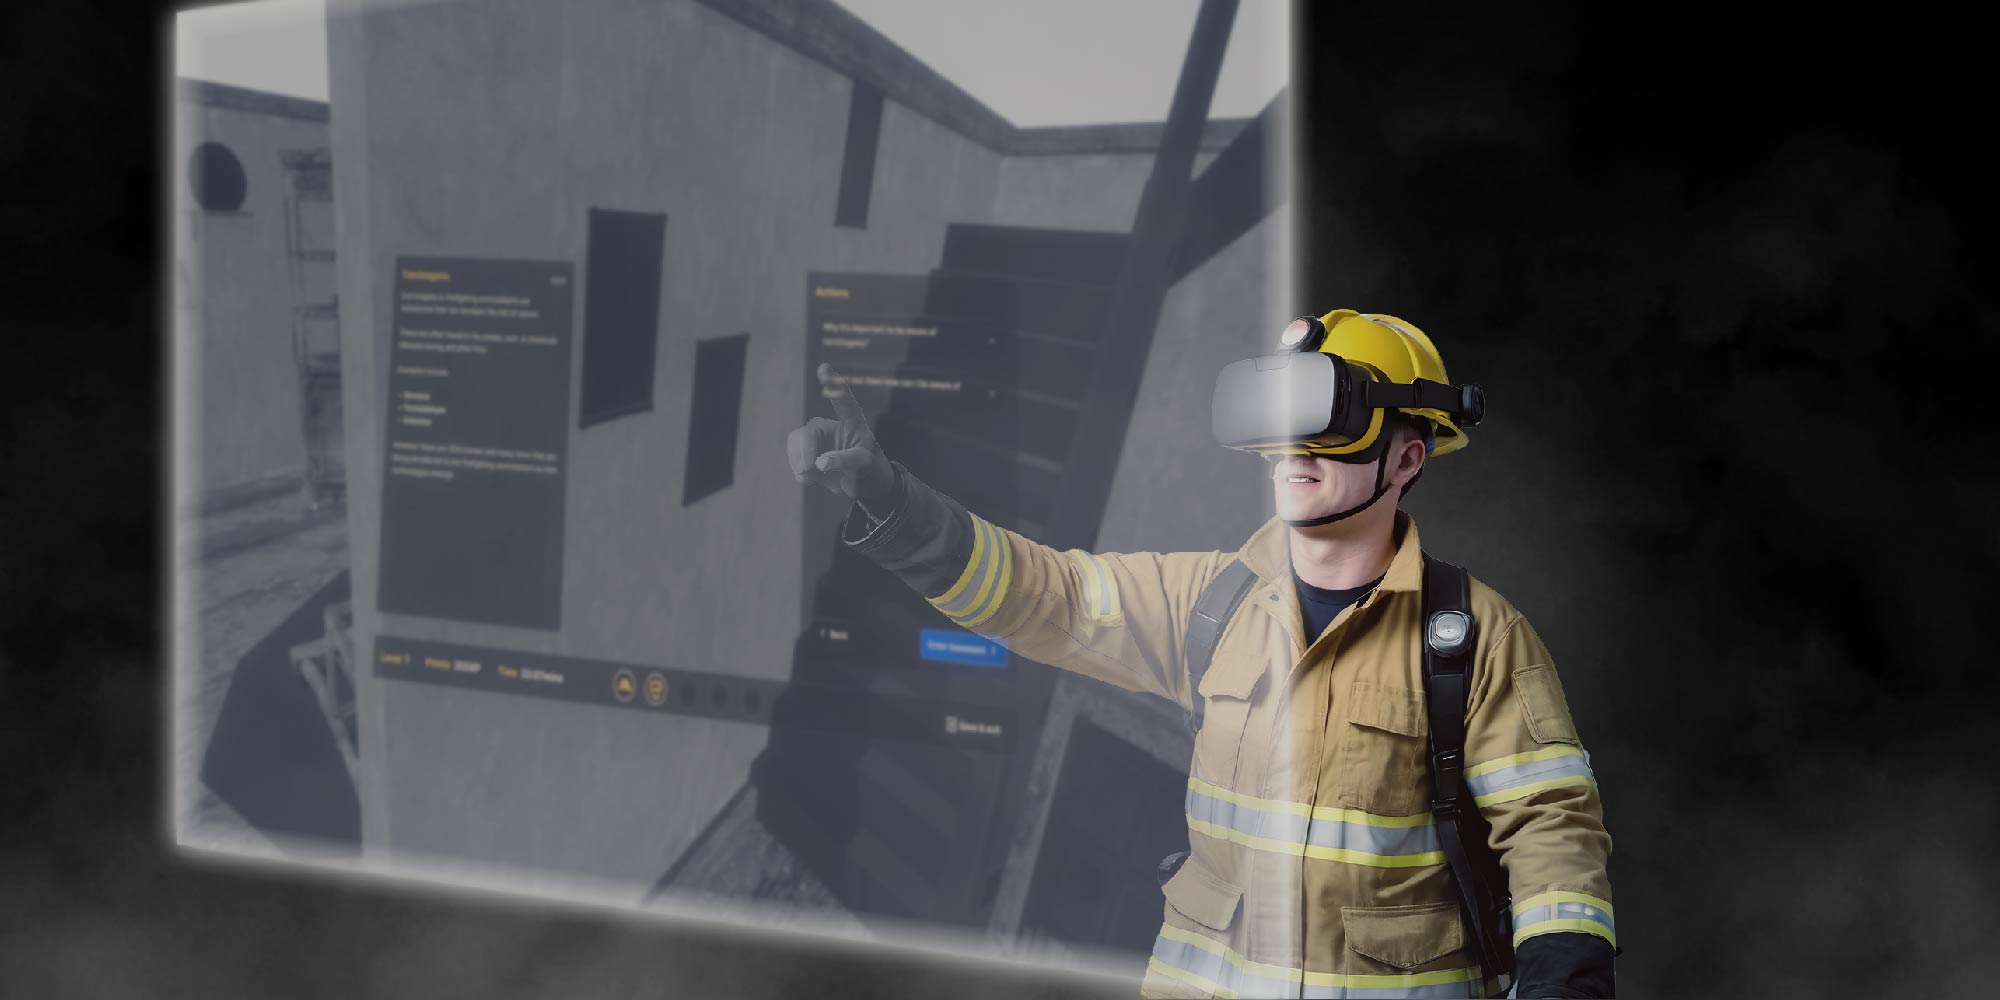 Firefighter using product in VR